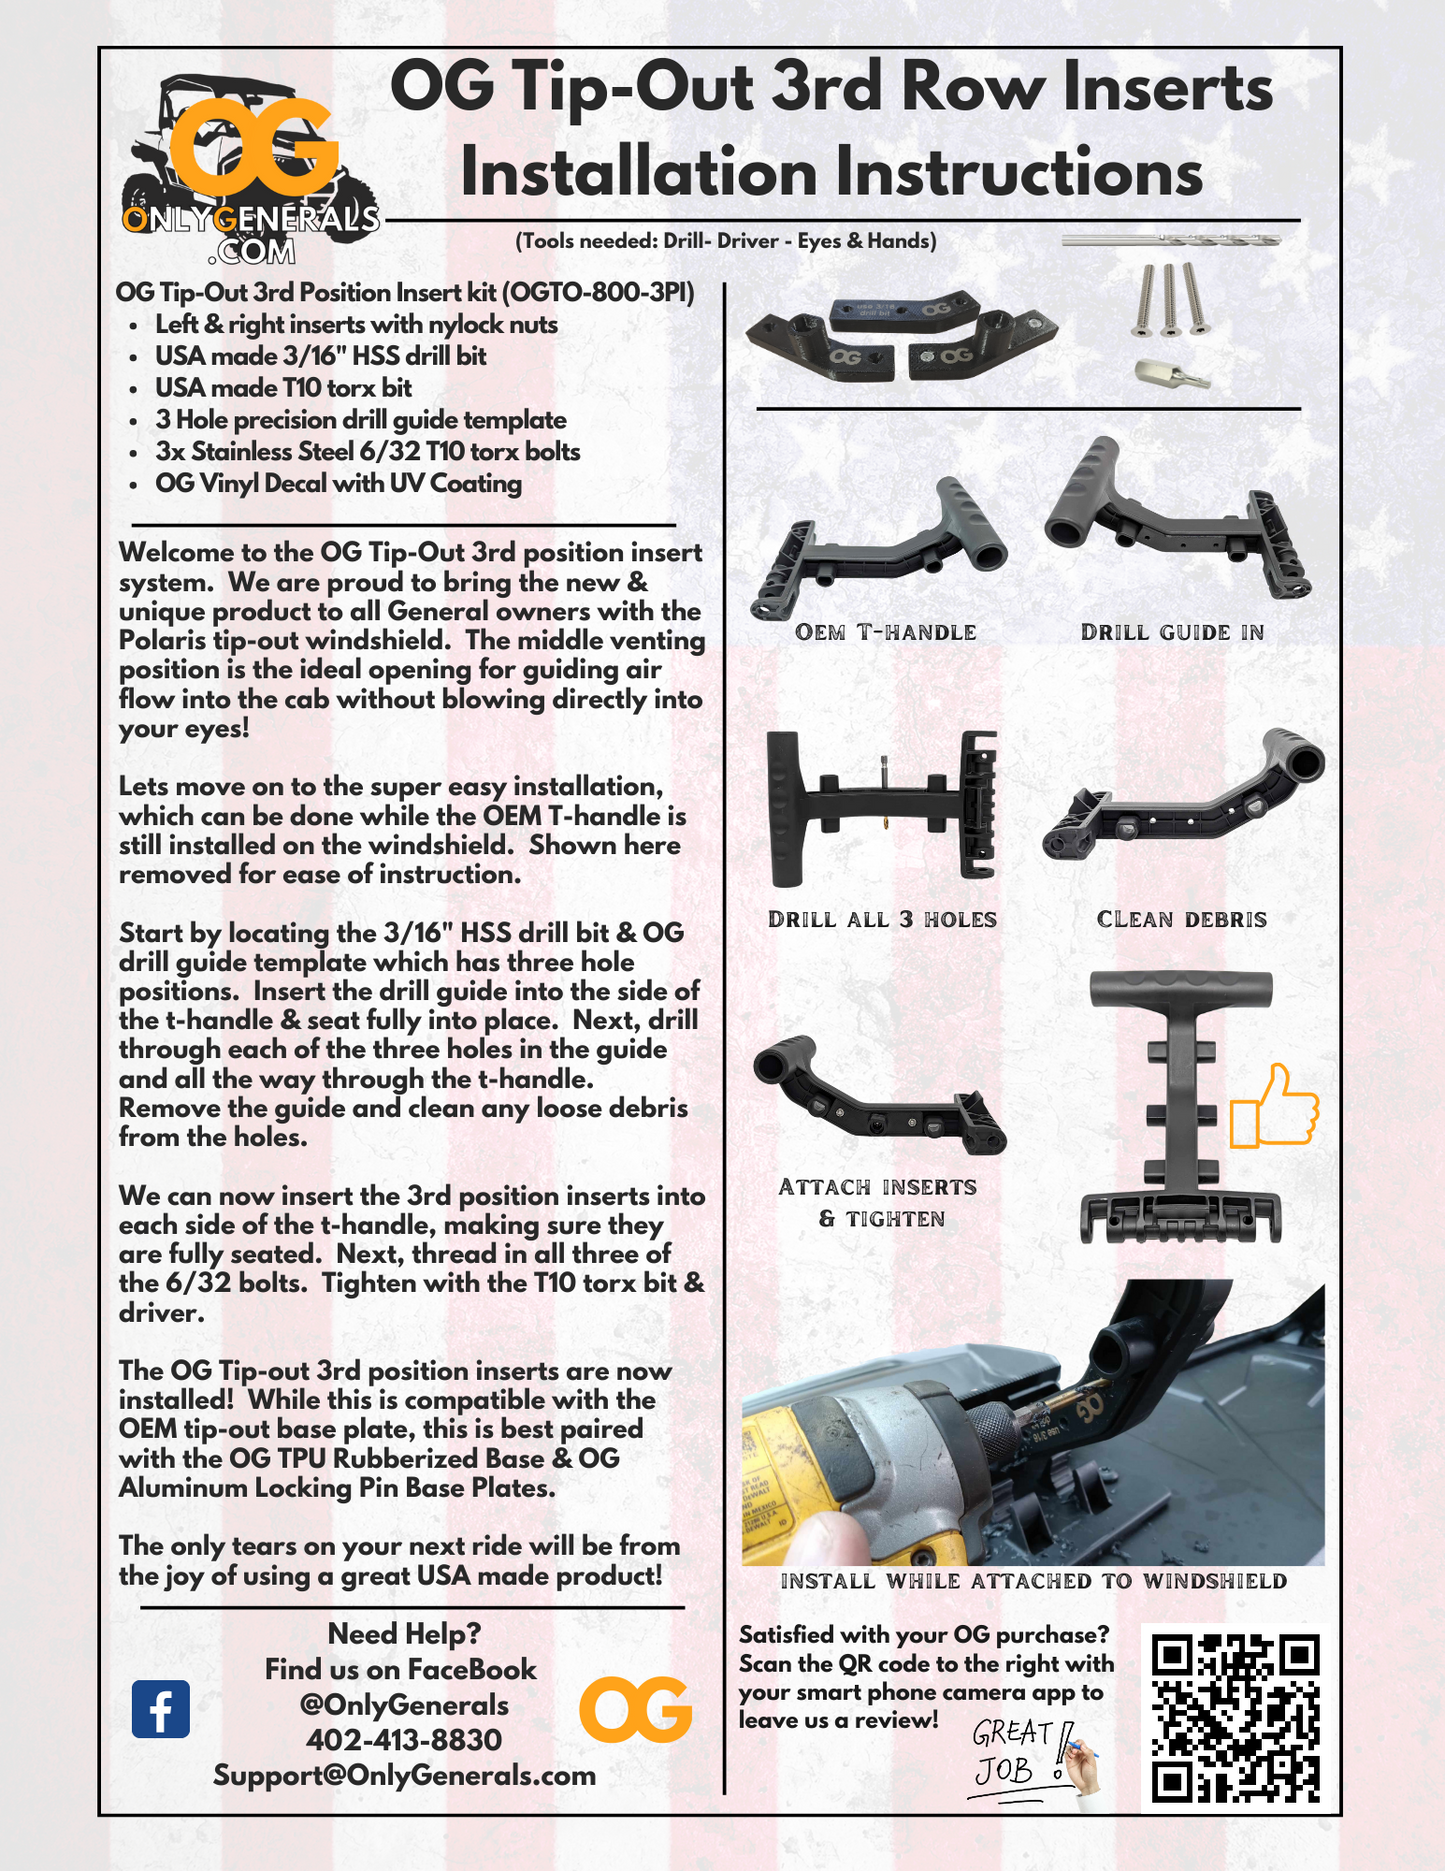 Image shows the Polaris General instruction sheet for the OnlyGenerals tip-out 3rd row insert kit